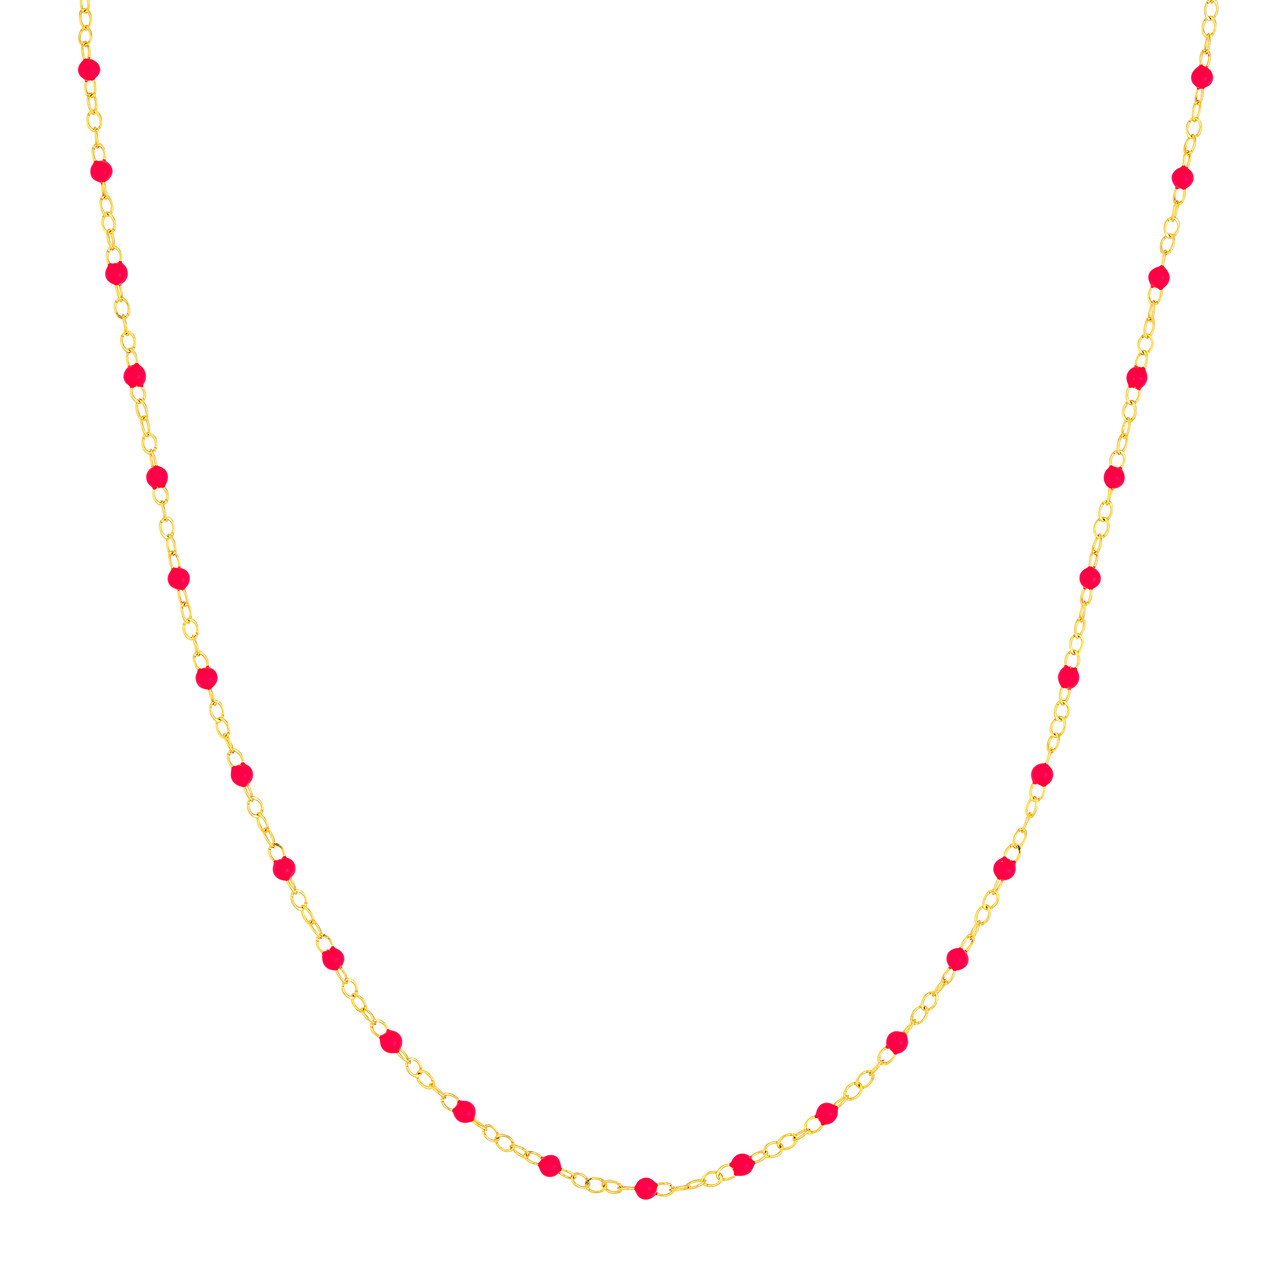 Yellow Gold Neon Pink Enamel Bead Chain Necklace l 18 inches